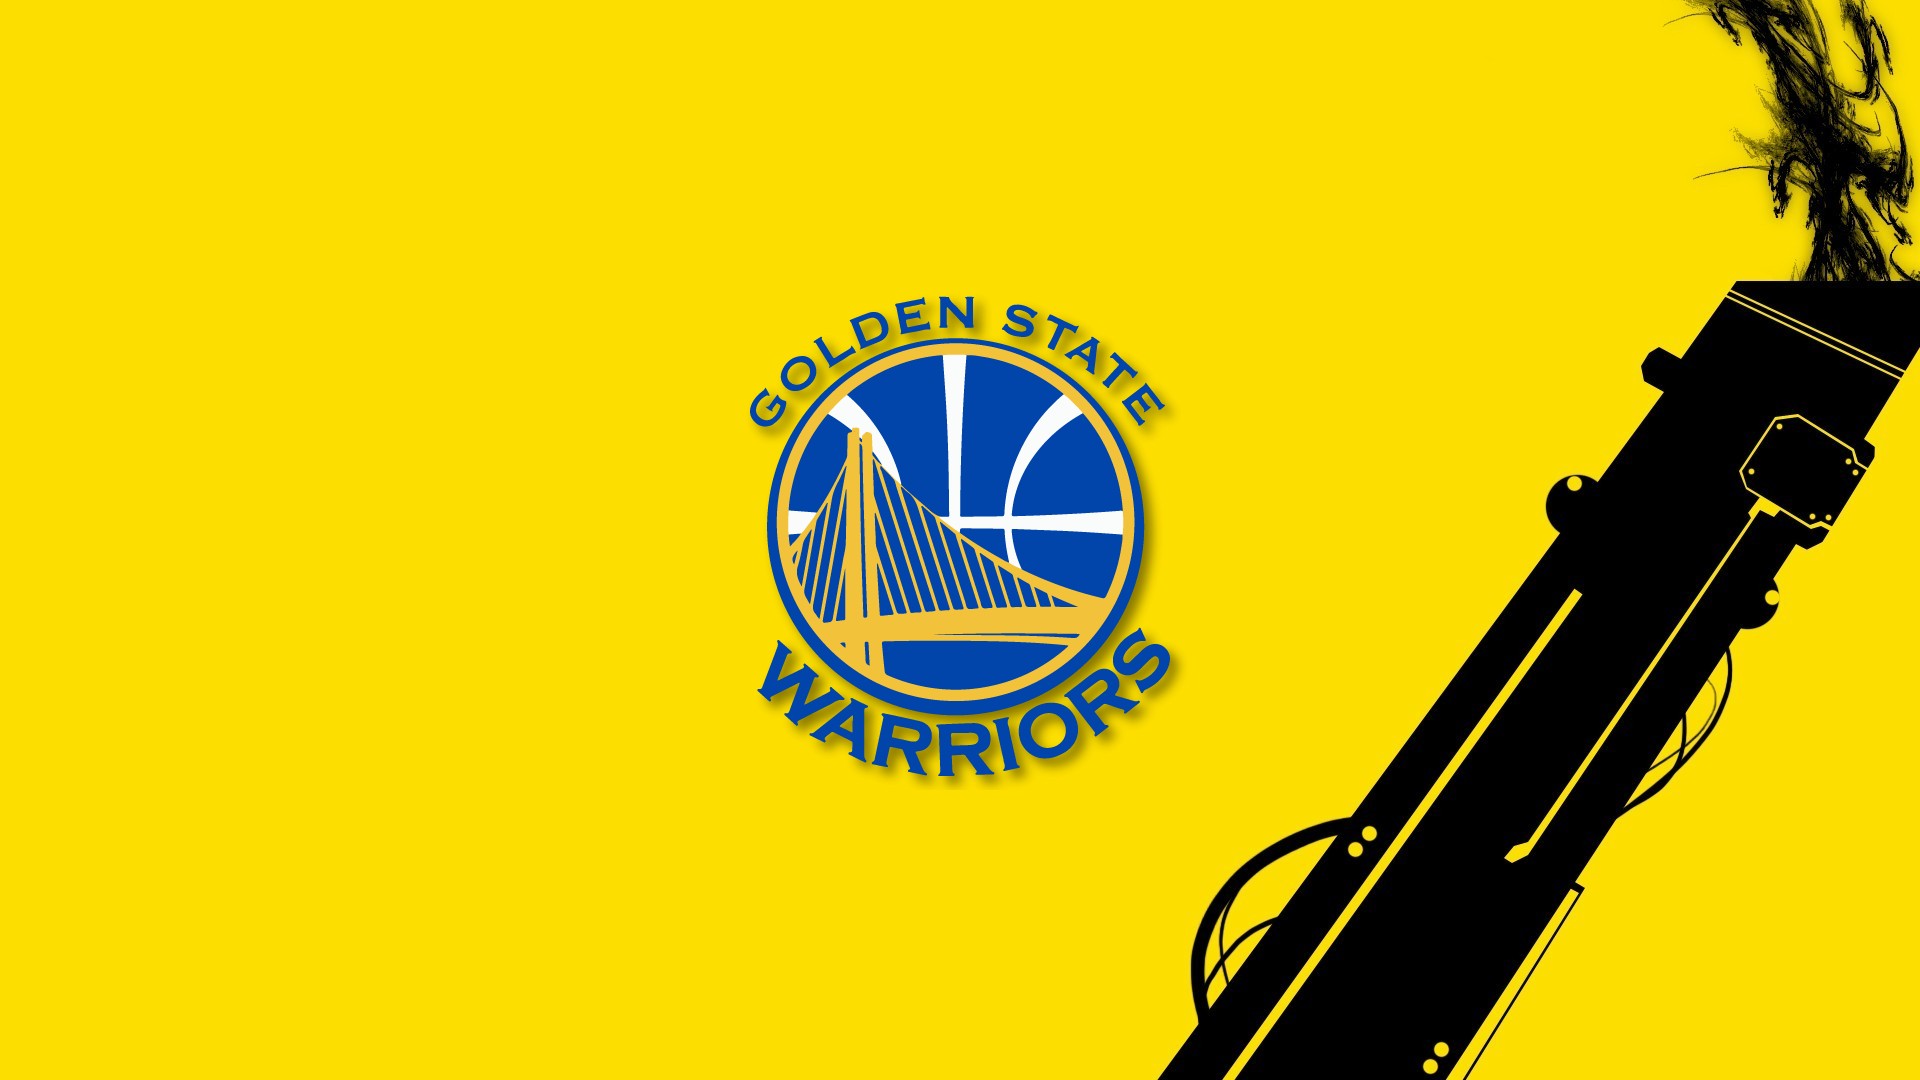 Cool Golden State Warriors Wallpaper HD With Resolution 1920X1080 pixel. You can make this wallpaper for your Desktop Computer Backgrounds, Mac Wallpapers, Android Lock screen or iPhone Screensavers